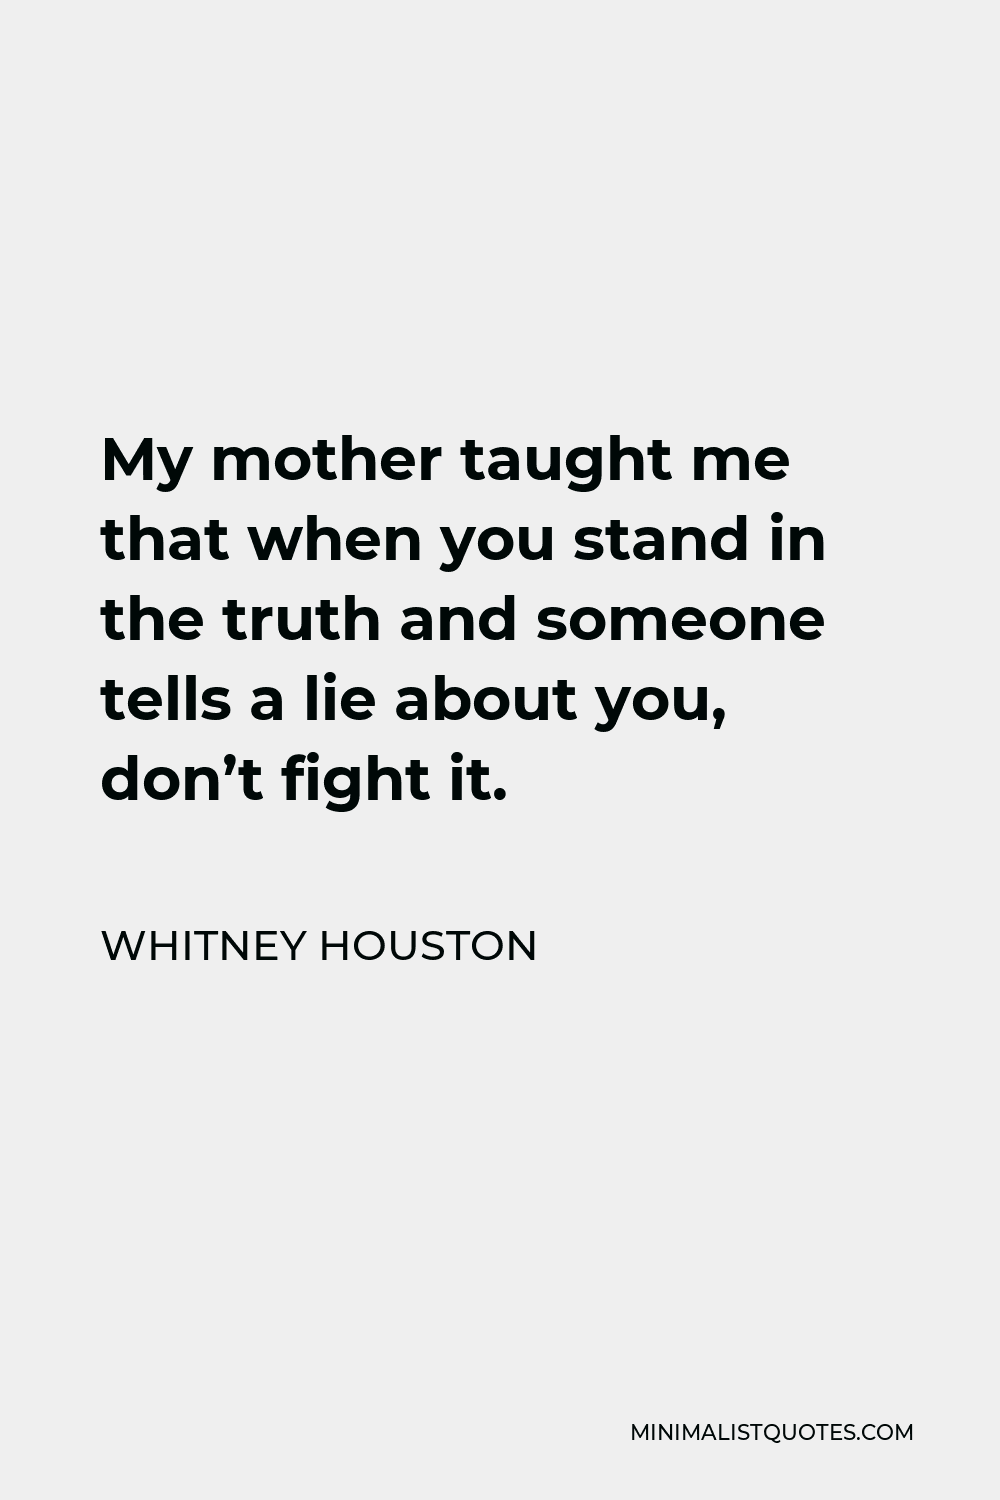 Whitney Houston Quote - My mother taught me that when you stand in the truth and someone tells a lie about you, don’t fight it.